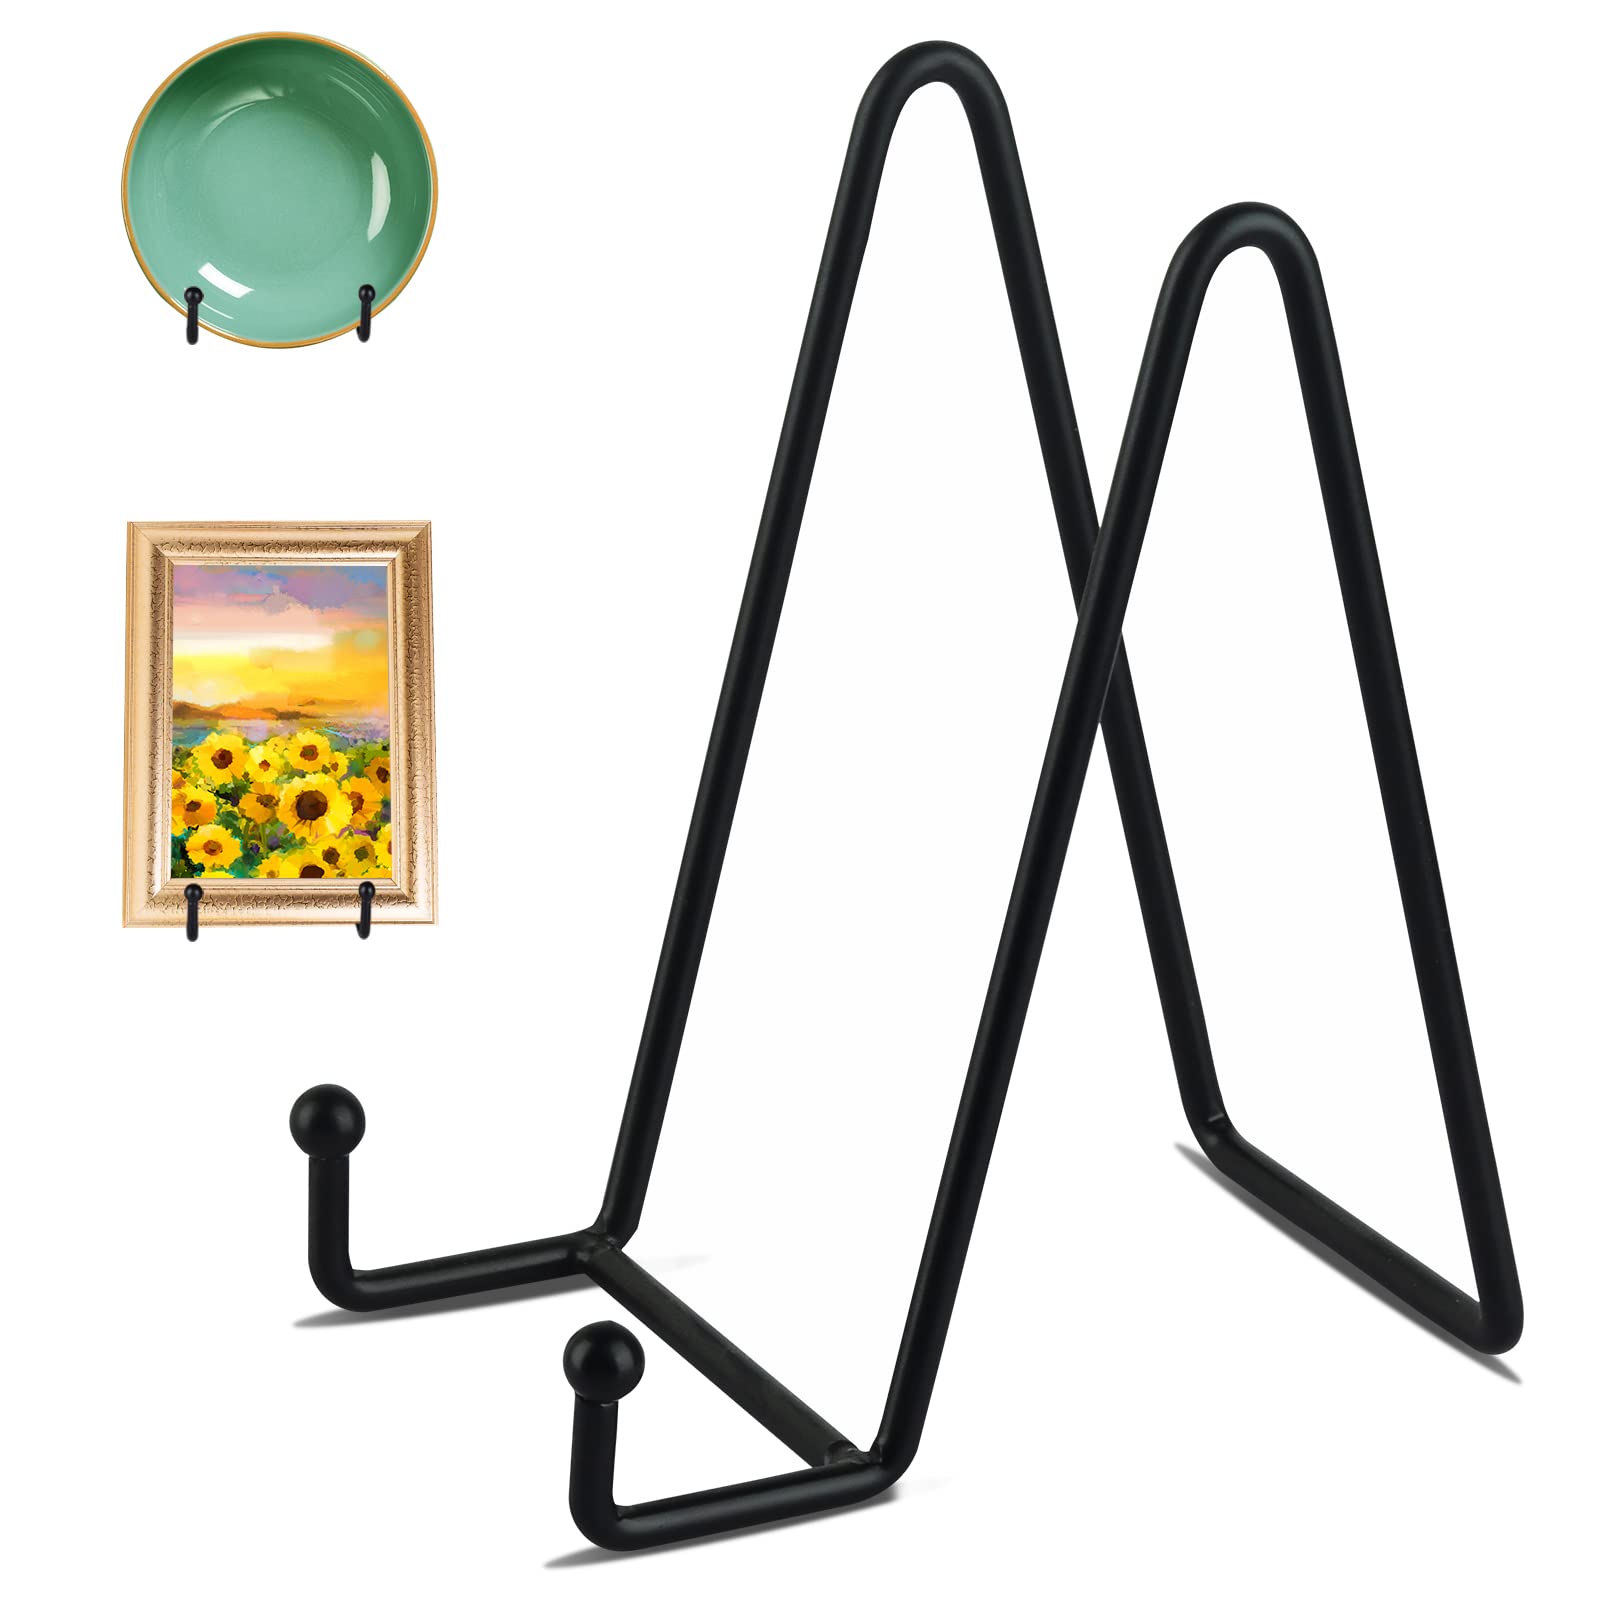 Decolore 3 Pack 6 Inch Black Metal Display Stands Plate Holder Display Stands For Picture, Decorative Plate, Book, Photo Easel,